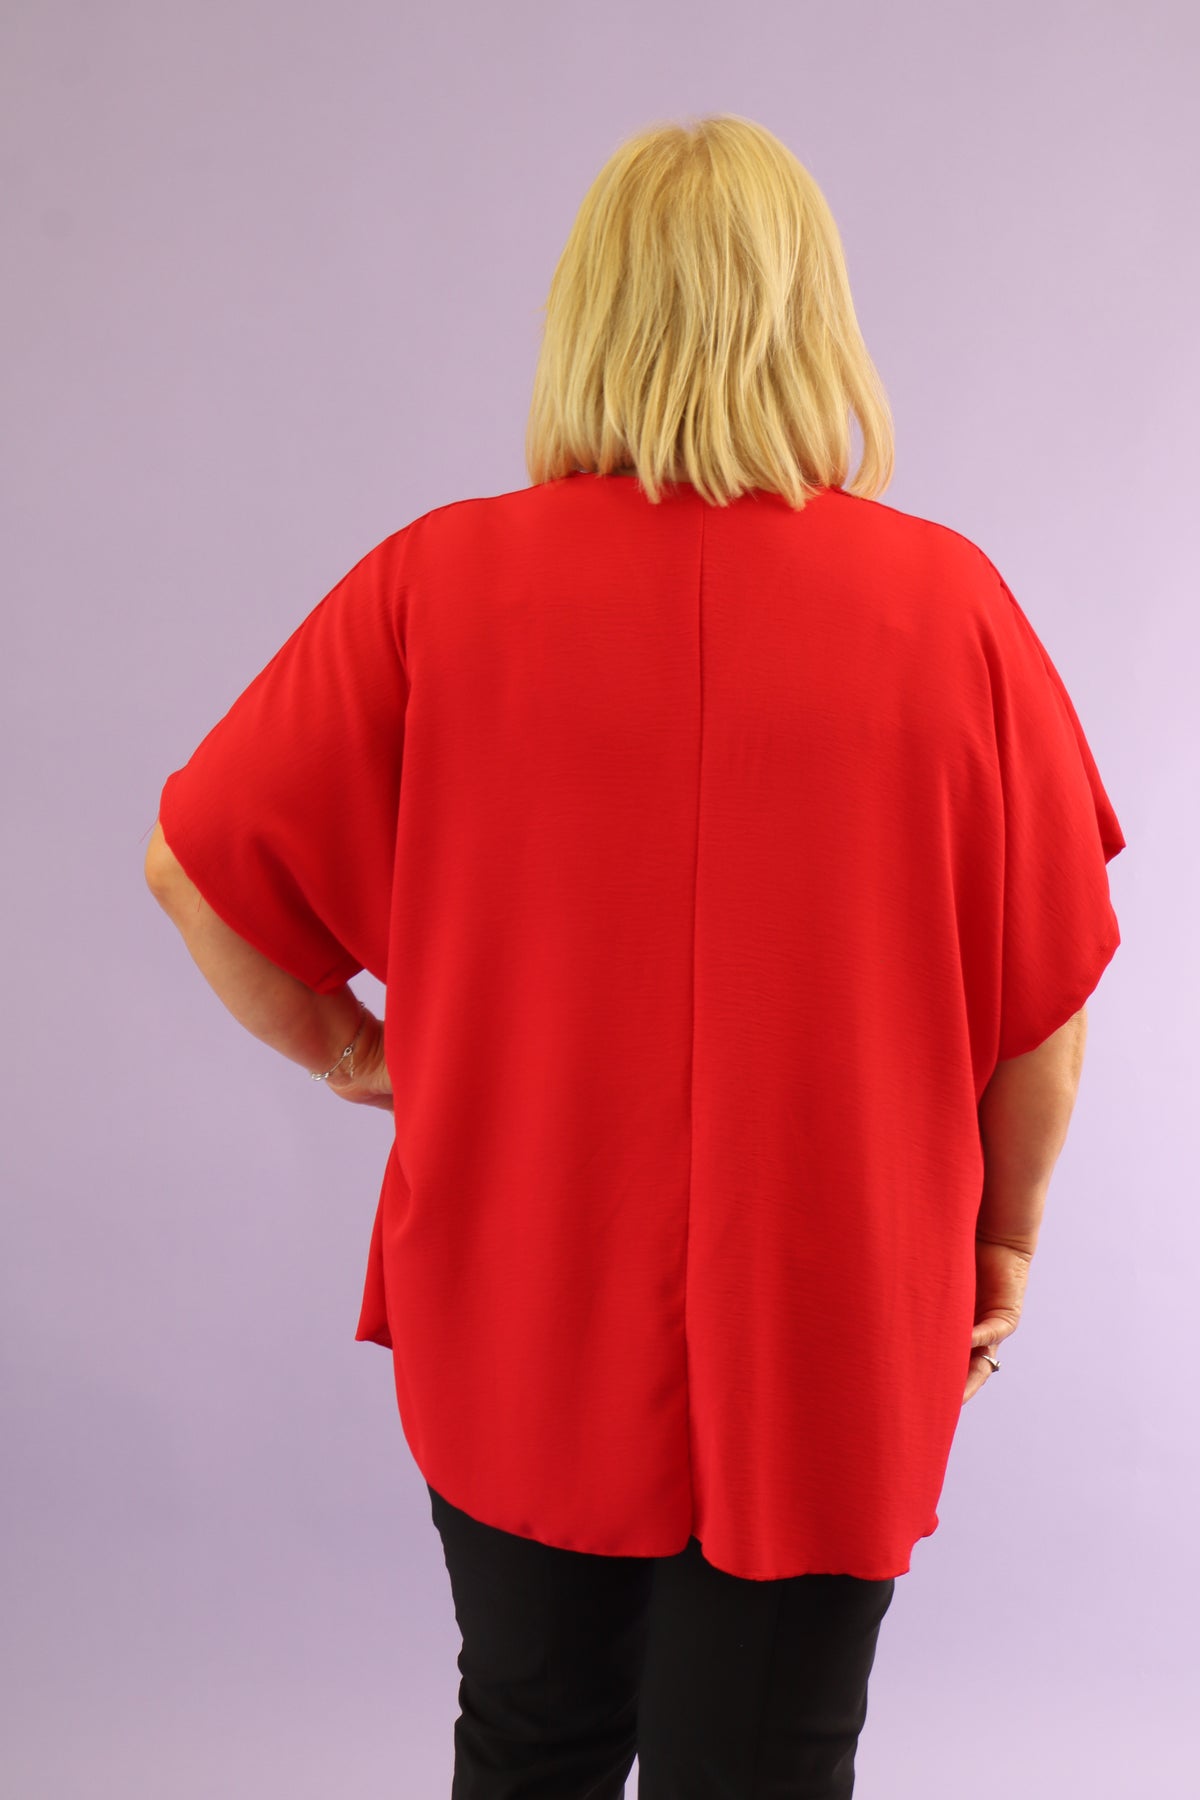 Ellie Blouse in Red